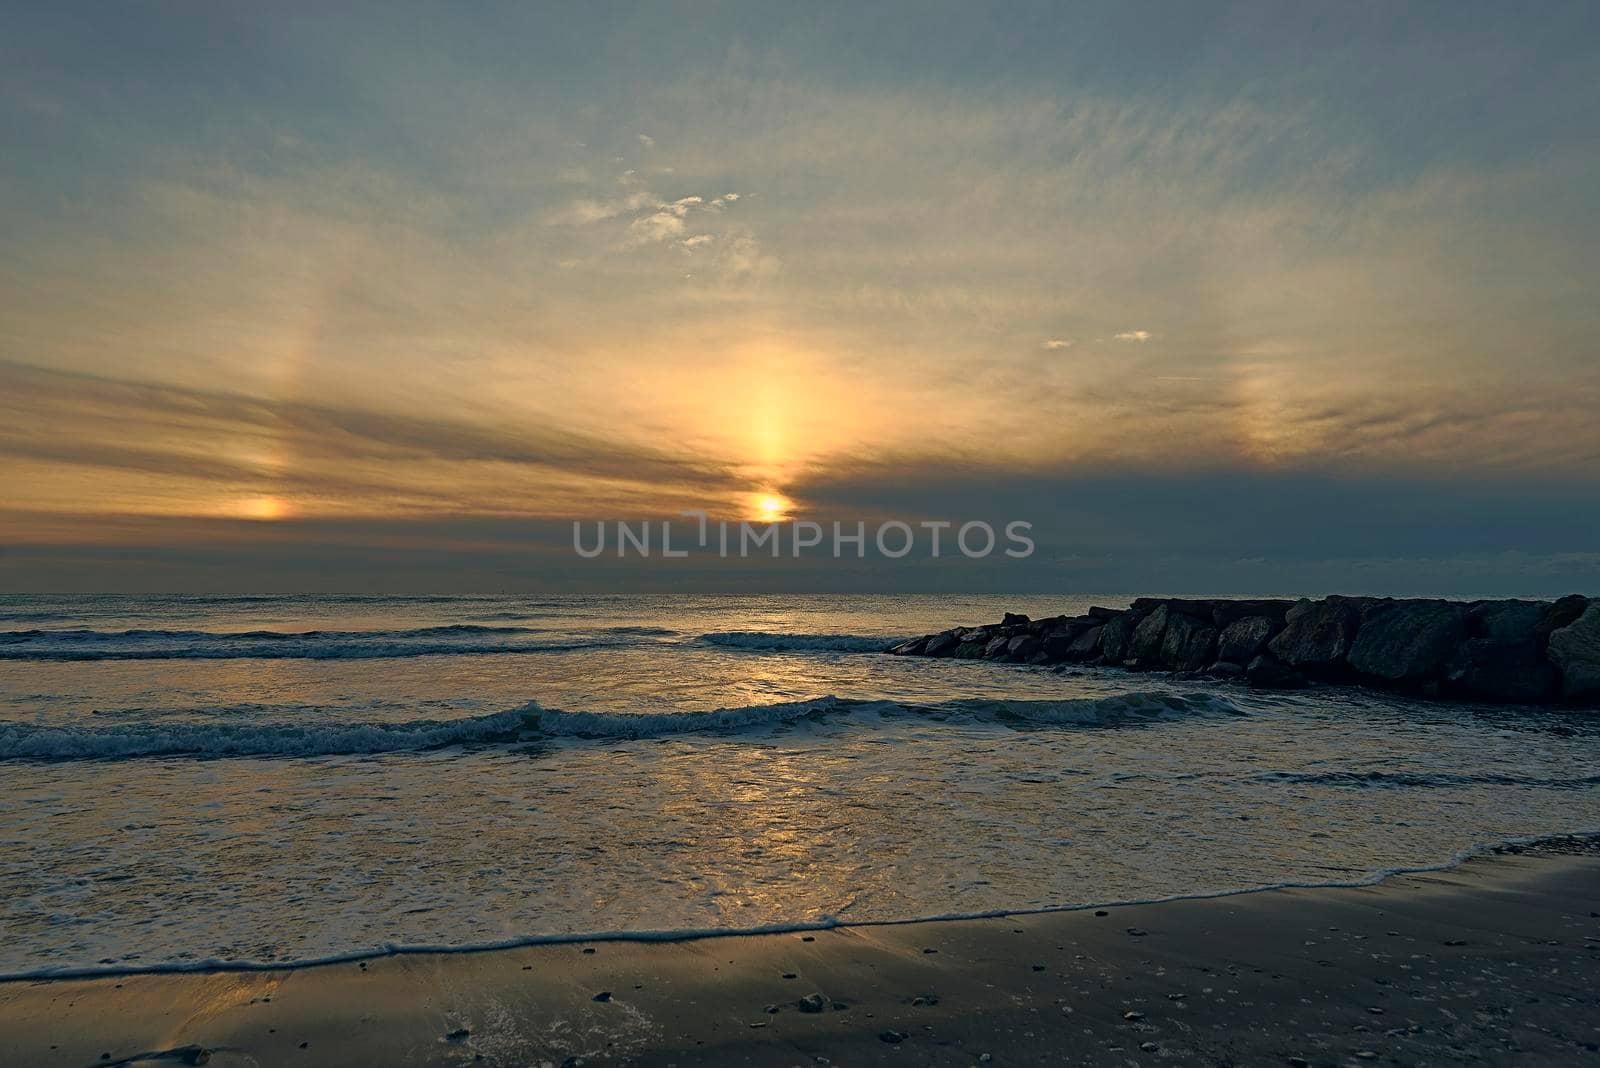 Sunrise from the beach with a breakwater. Rainbow, Circle around the sun, clouds and blue sky, waves, calm sea